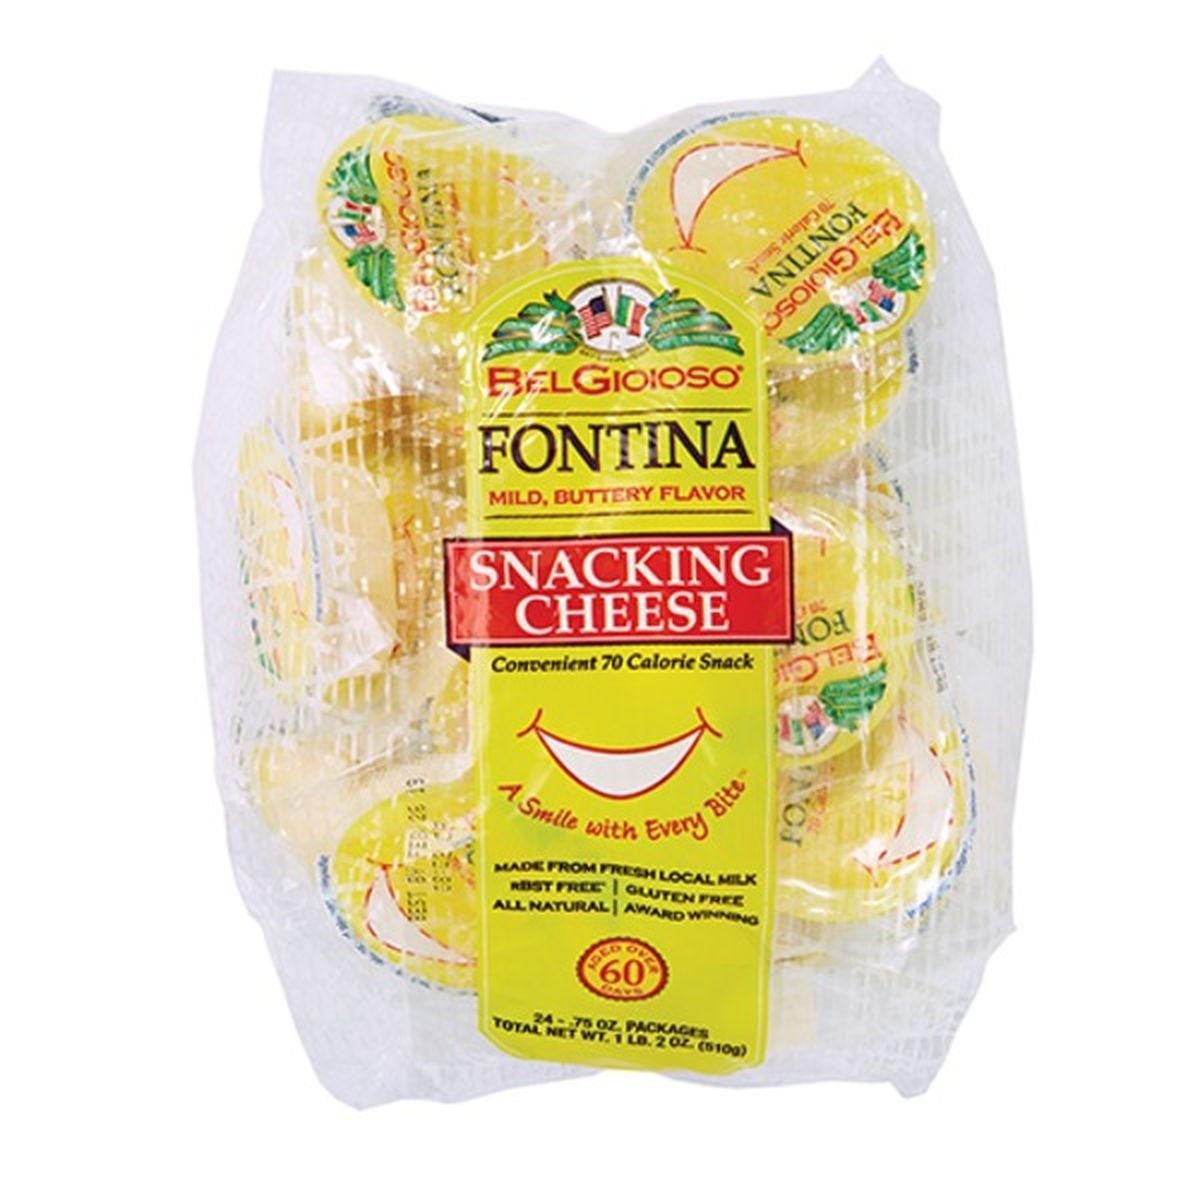 Calories in BelGioioso Fontina Snacking Cheese